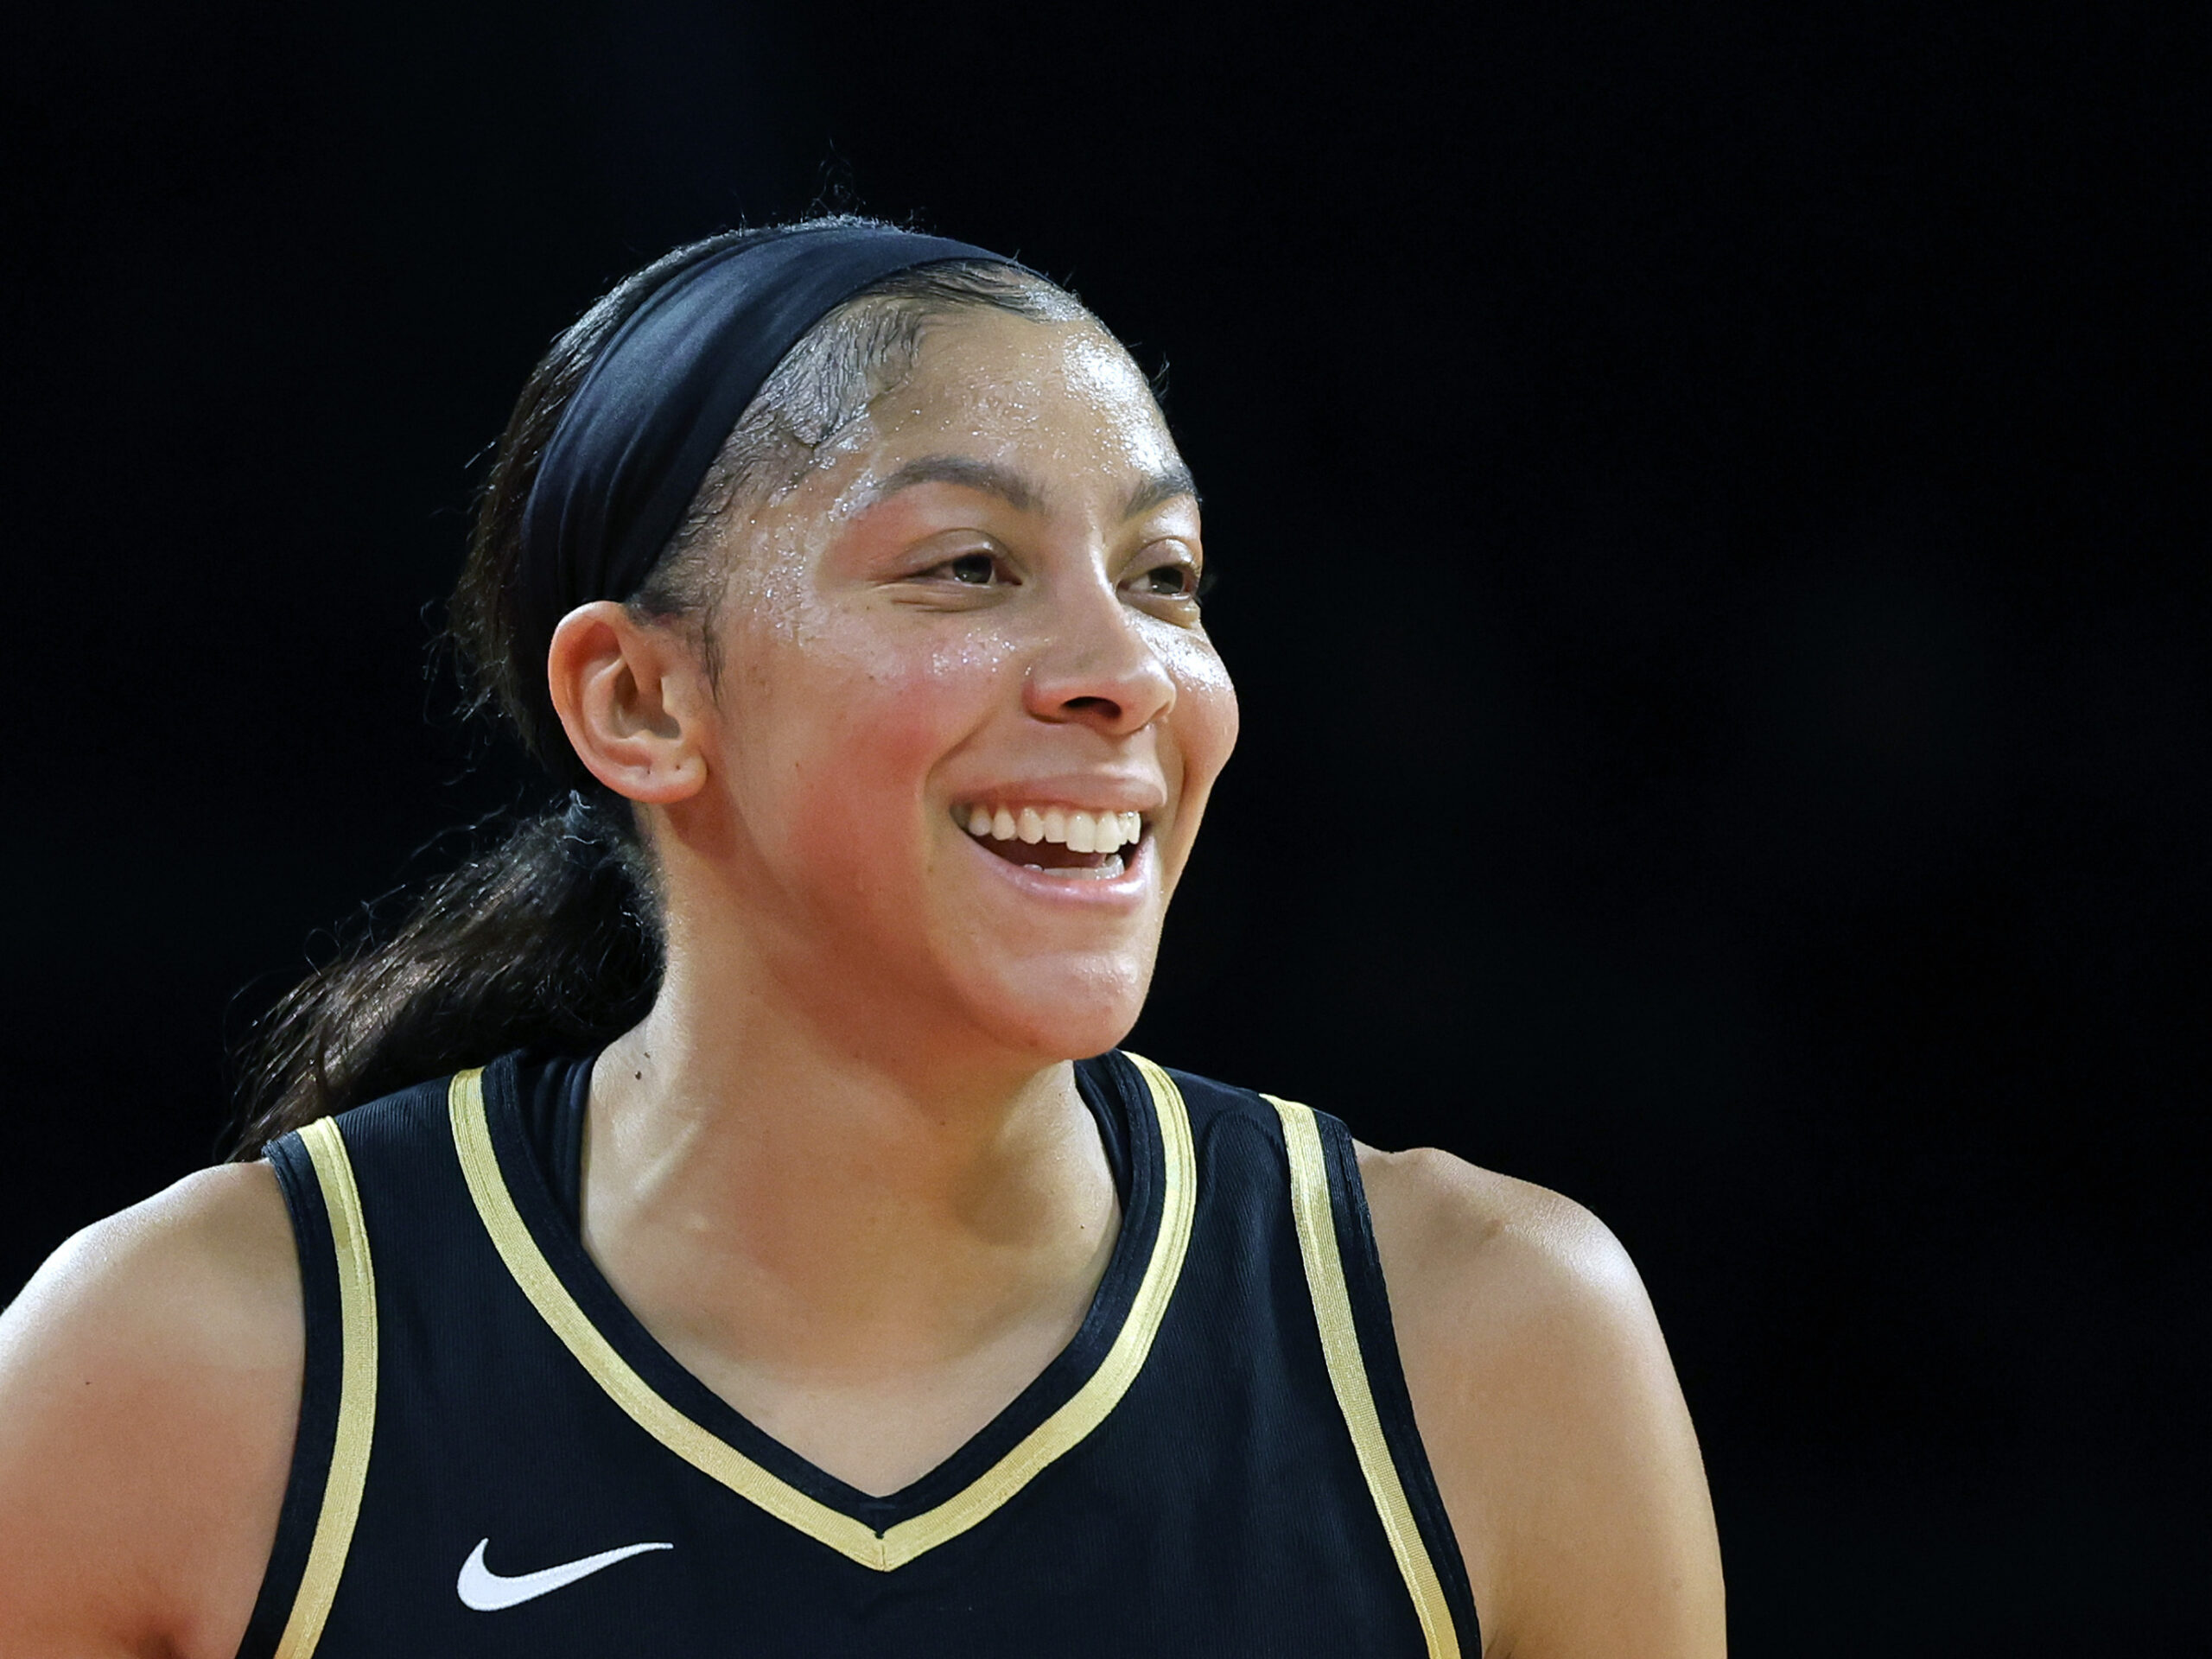 Candace Parker, 3-time WNBA and 2-time Olympic champion, says ‘it’s time’ to retire